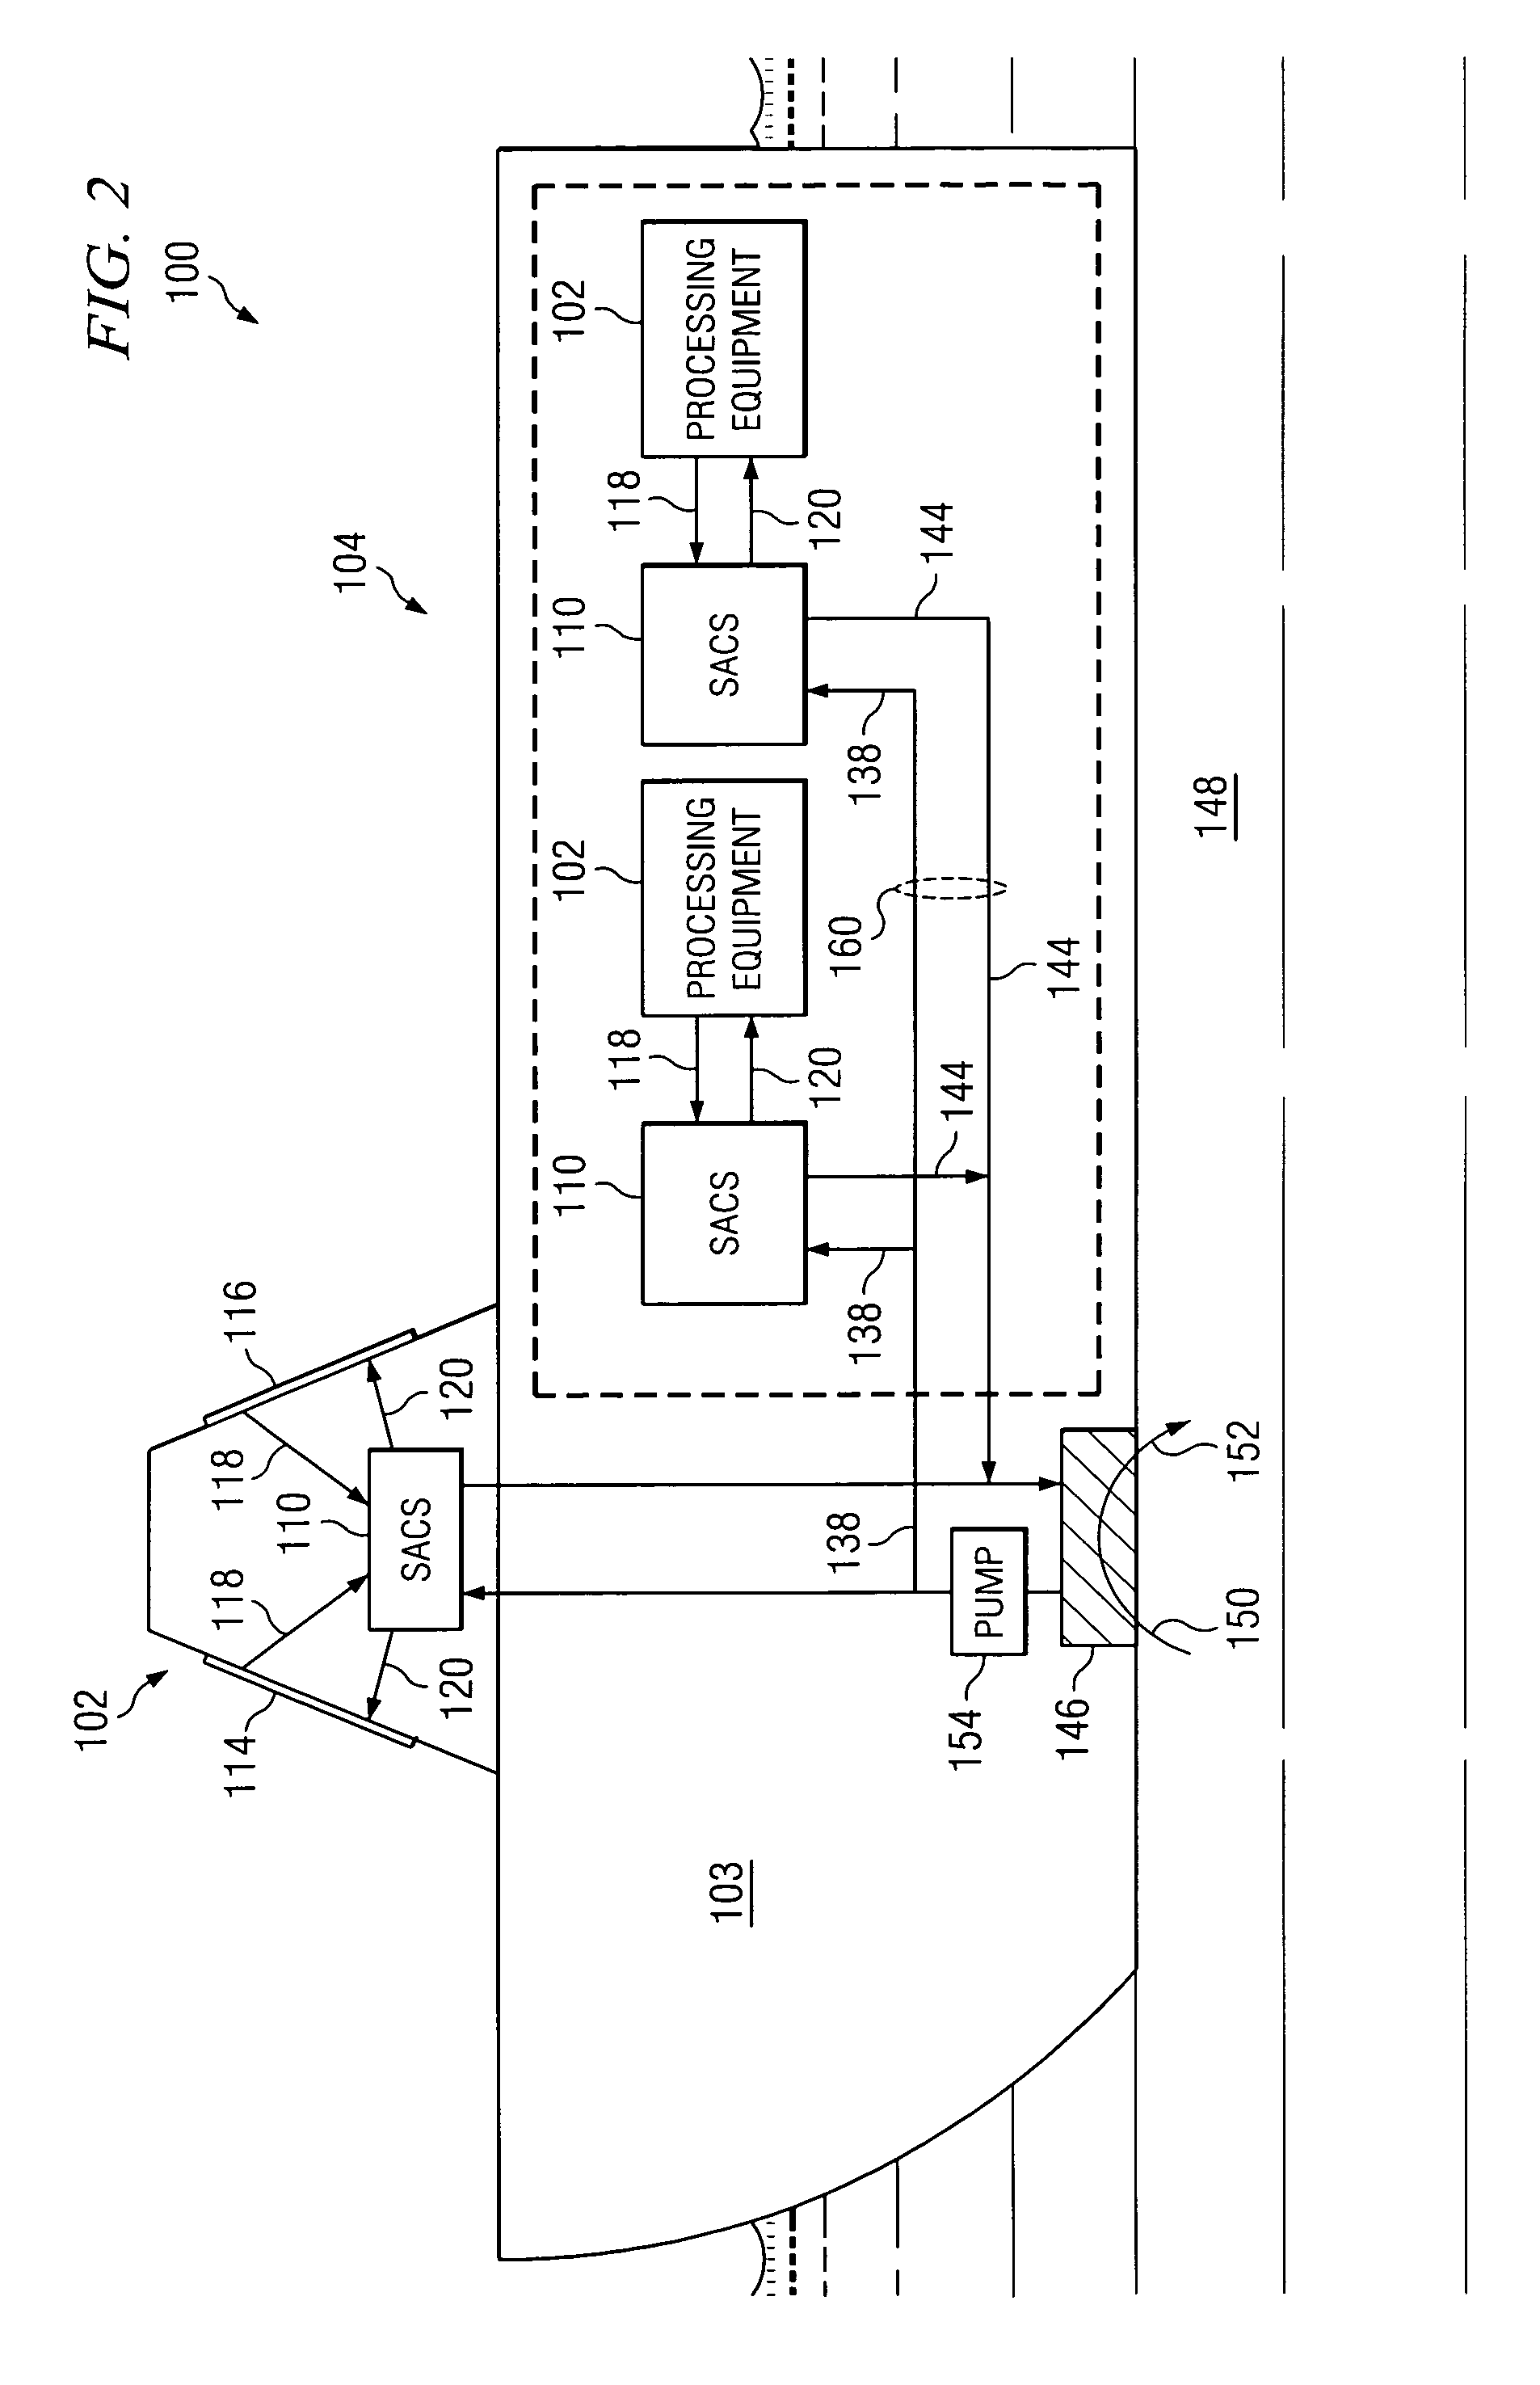 Method and apparatus for cooling with coolant at a subambient pressure